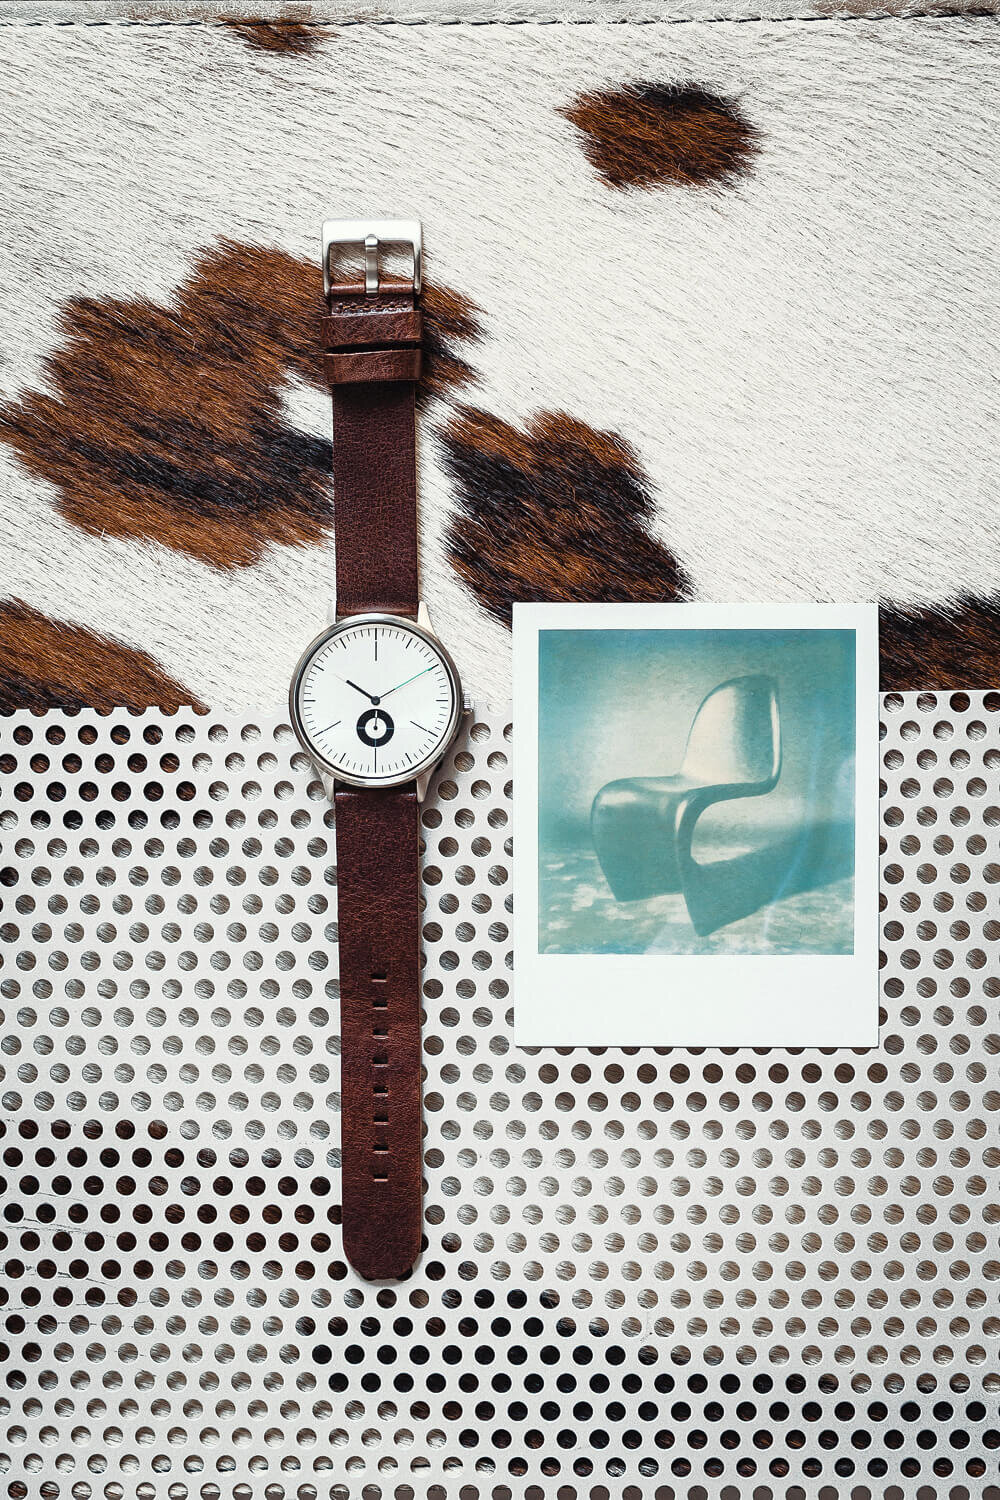 Natural light watch product photography by Mikel Muruzabal Studio / Advertising Photographers in Spain